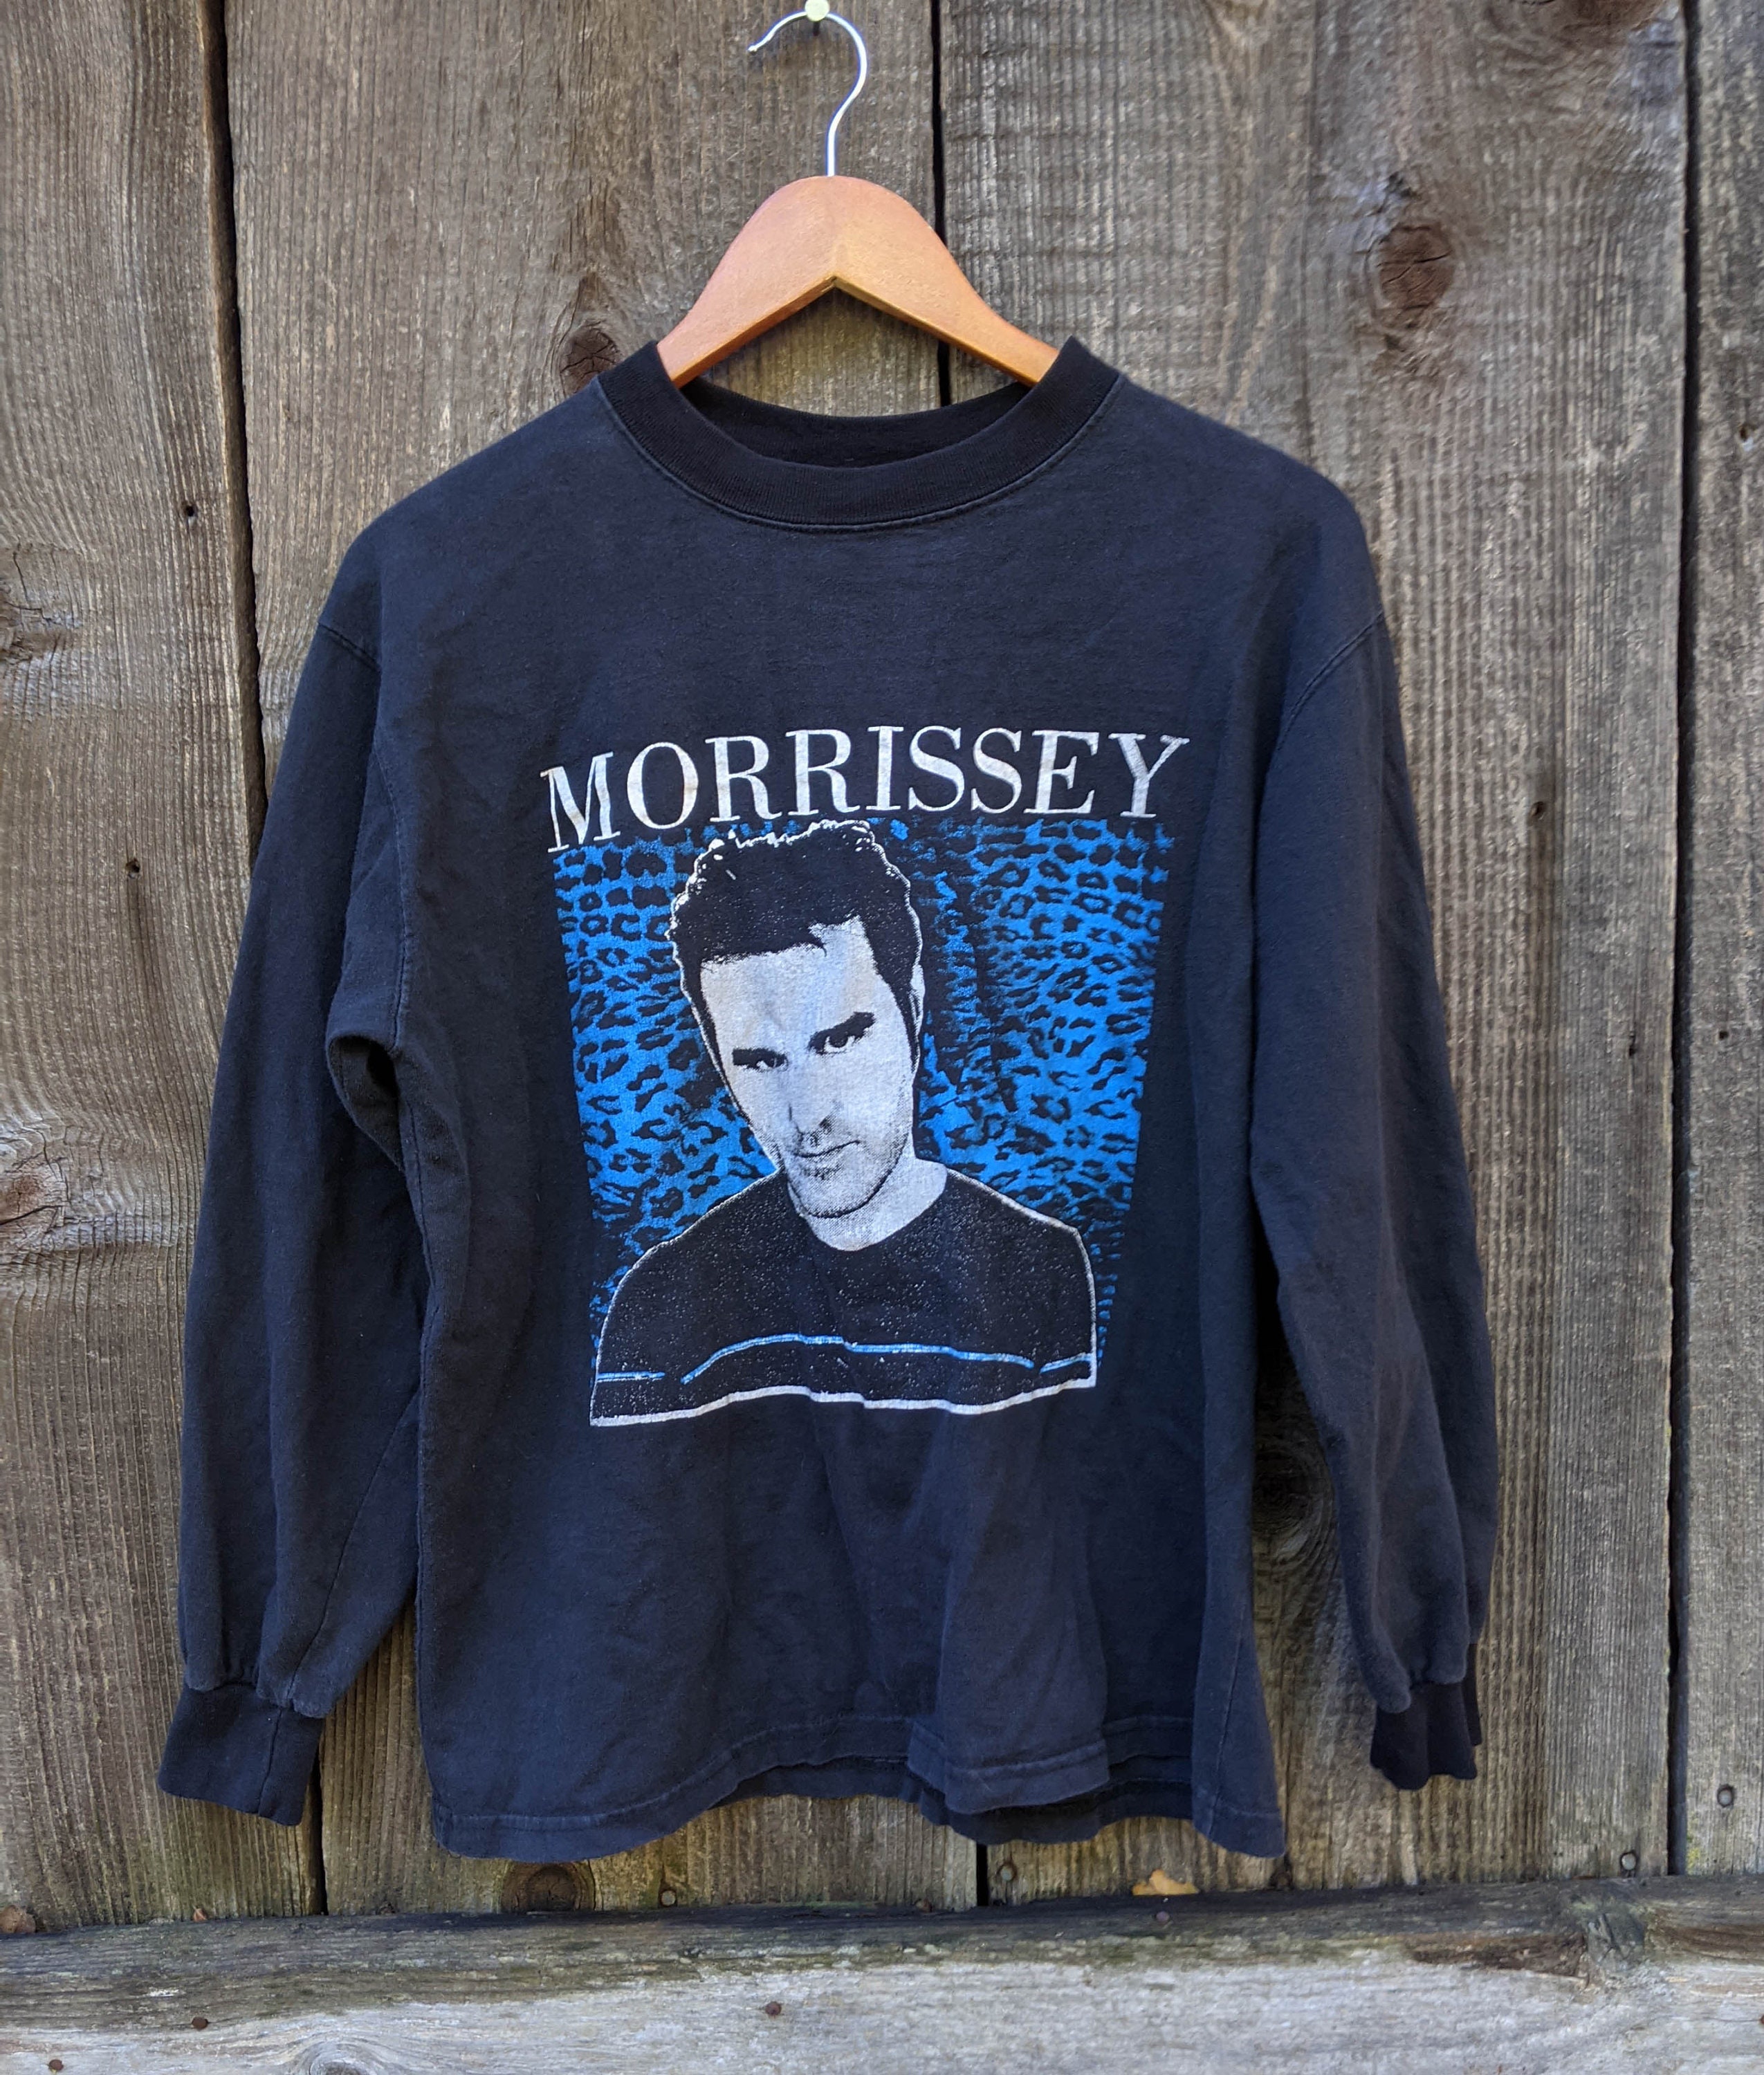 90s Vintage Morrissey T Shirt / Long Sleeve Band 1999 Tour Tee - Etsy